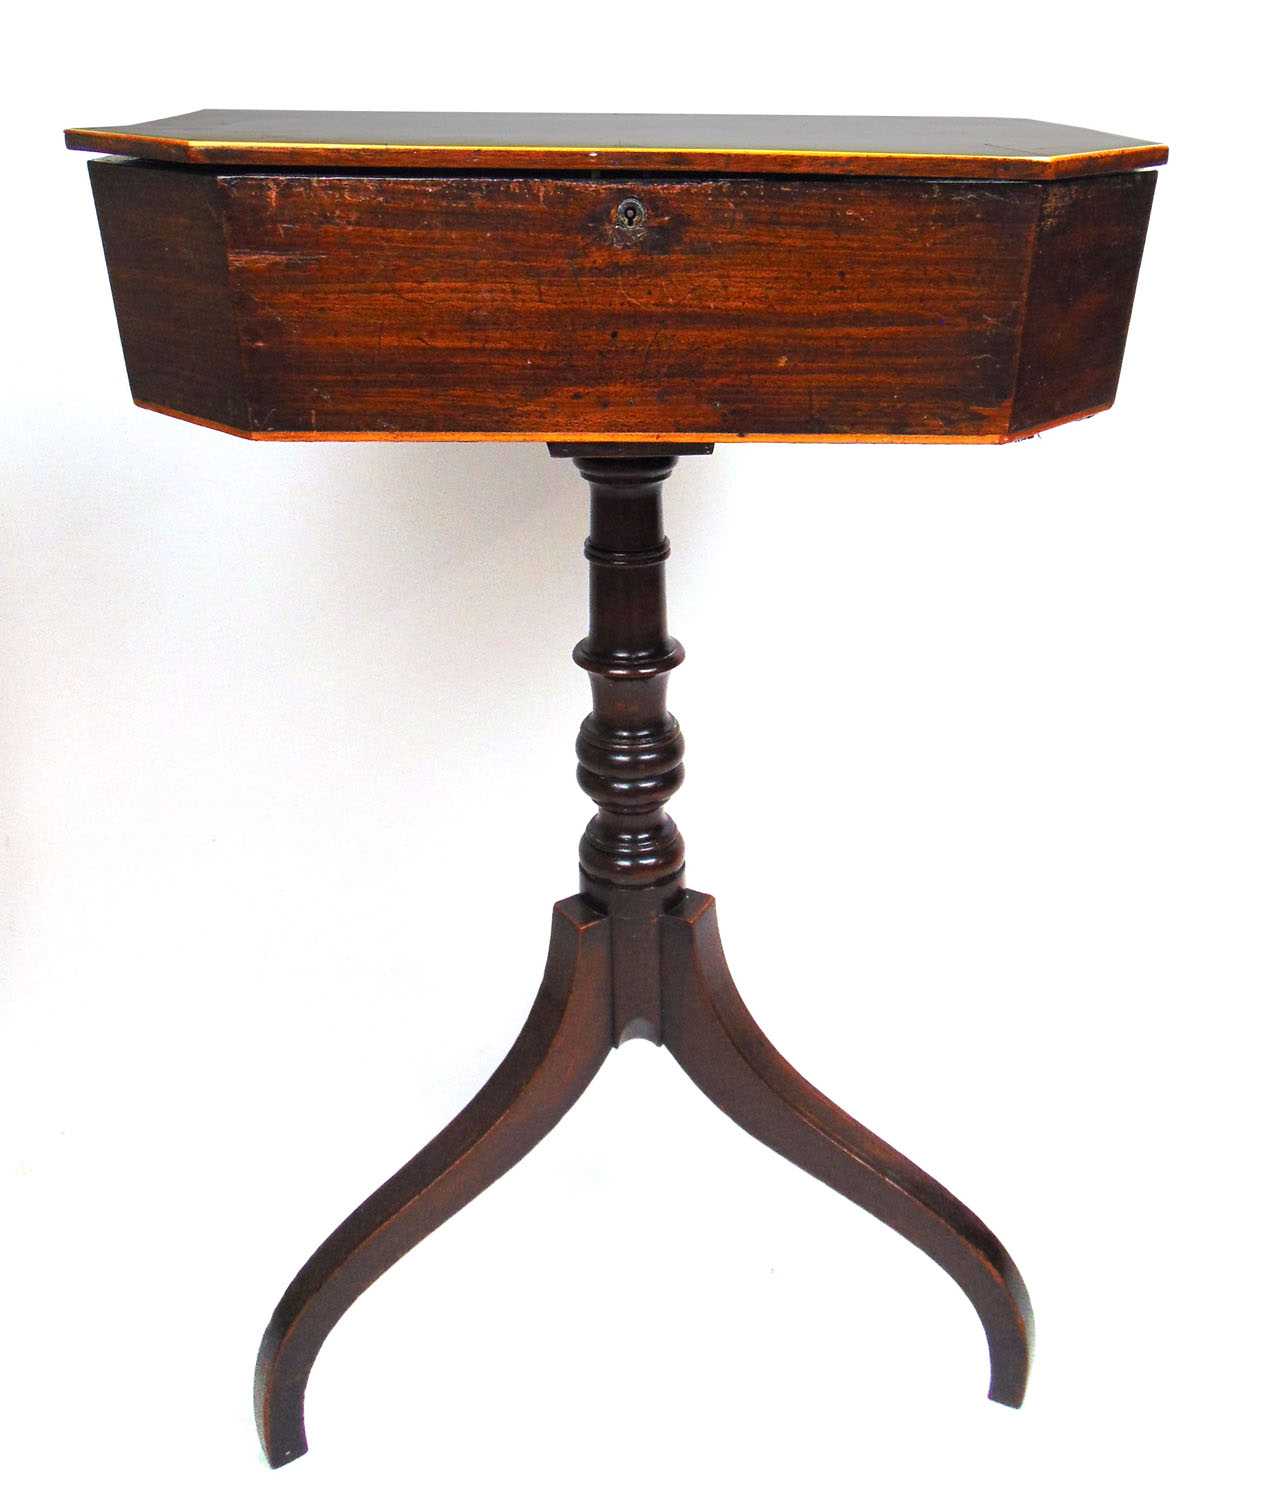 An 18th century mahogany and oak banded work table, the top lifting to reveal a silk lined